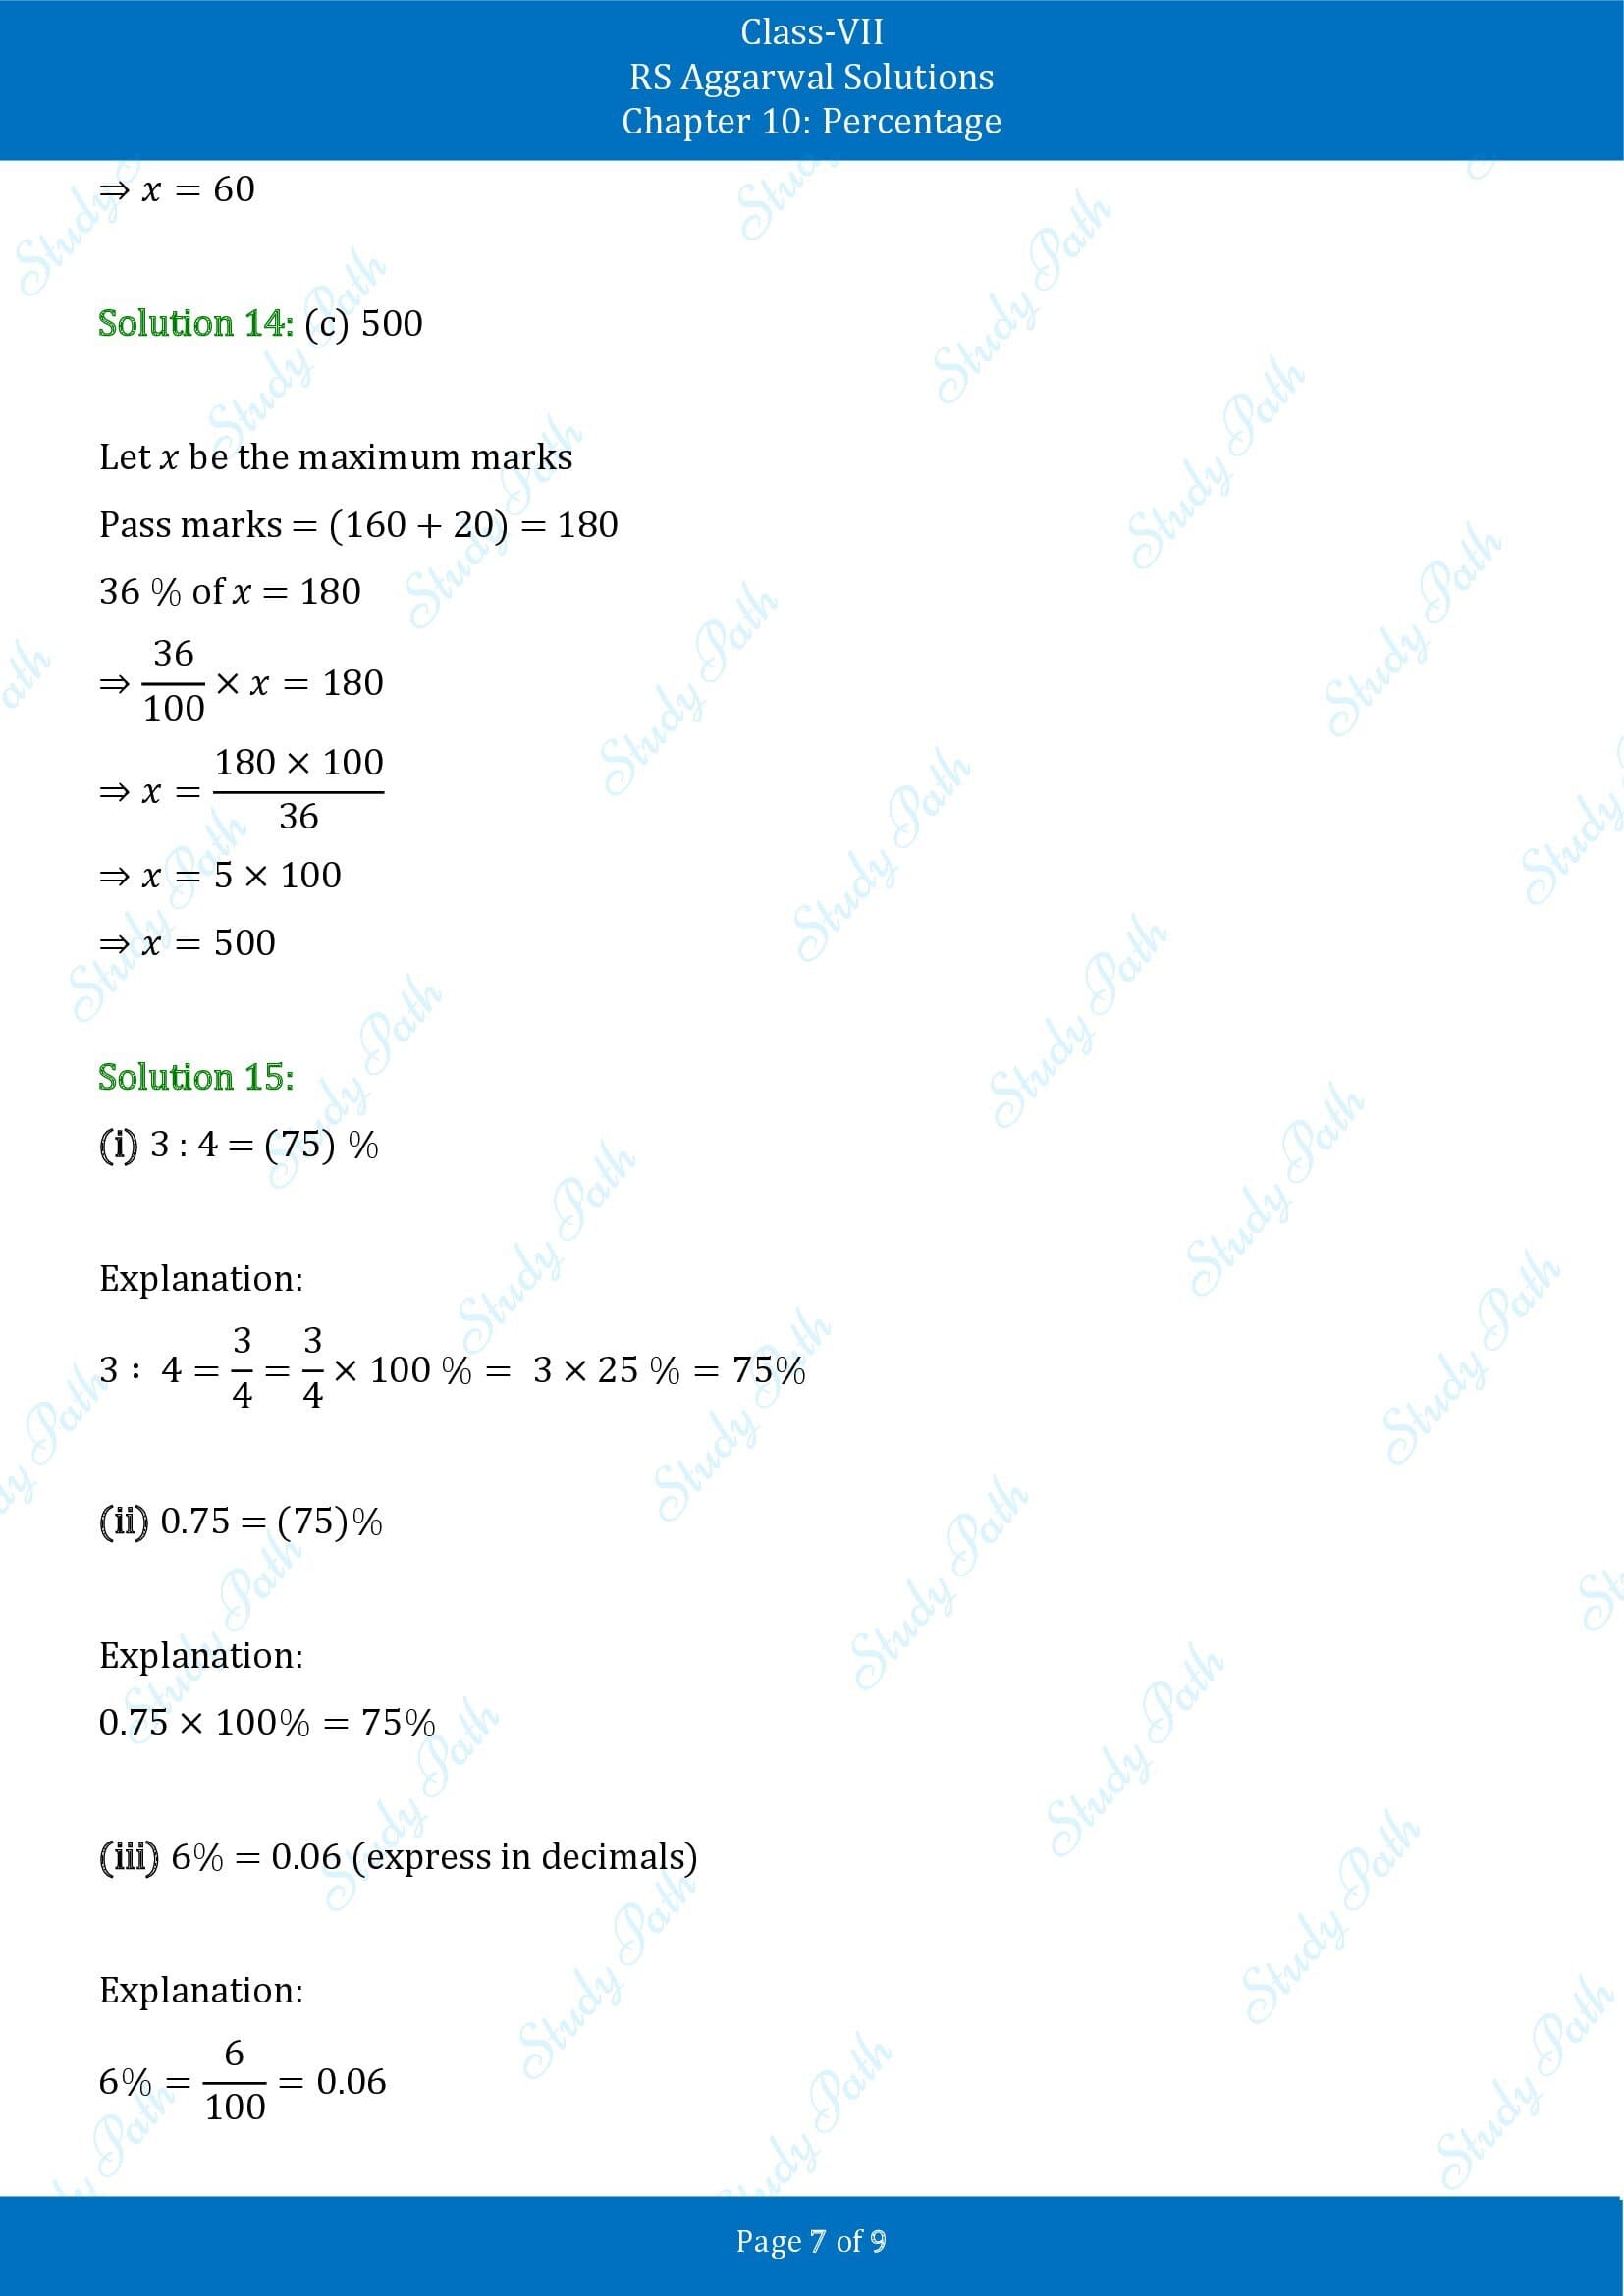 RS Aggarwal Solutions Class 7 Chapter 10 Percentage Test Paper 00007